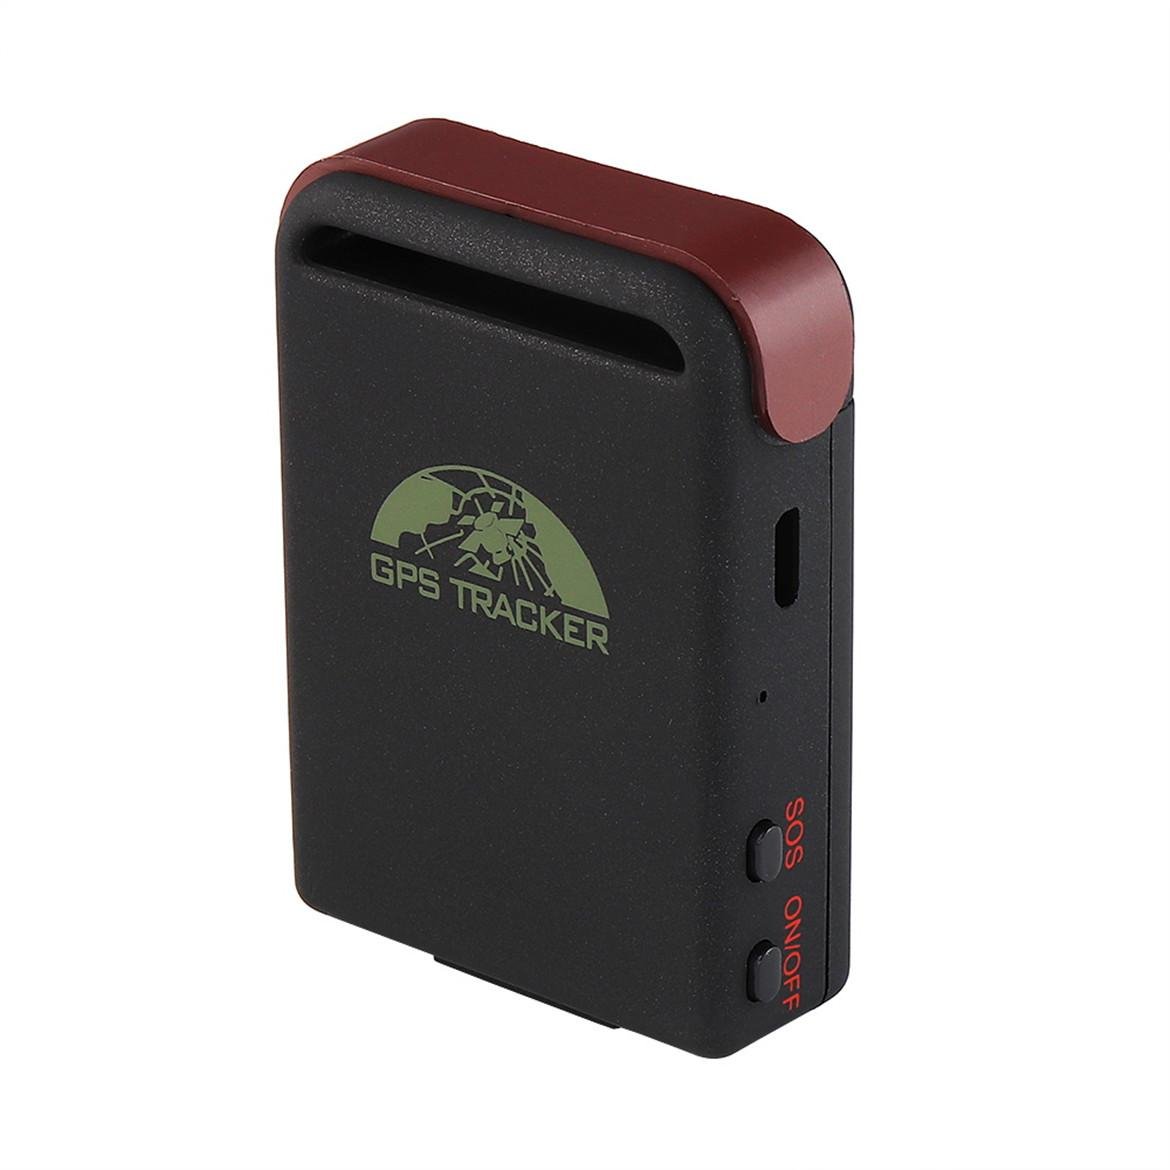 Portable Gps tracker personal locator gps tk102b with SOS button